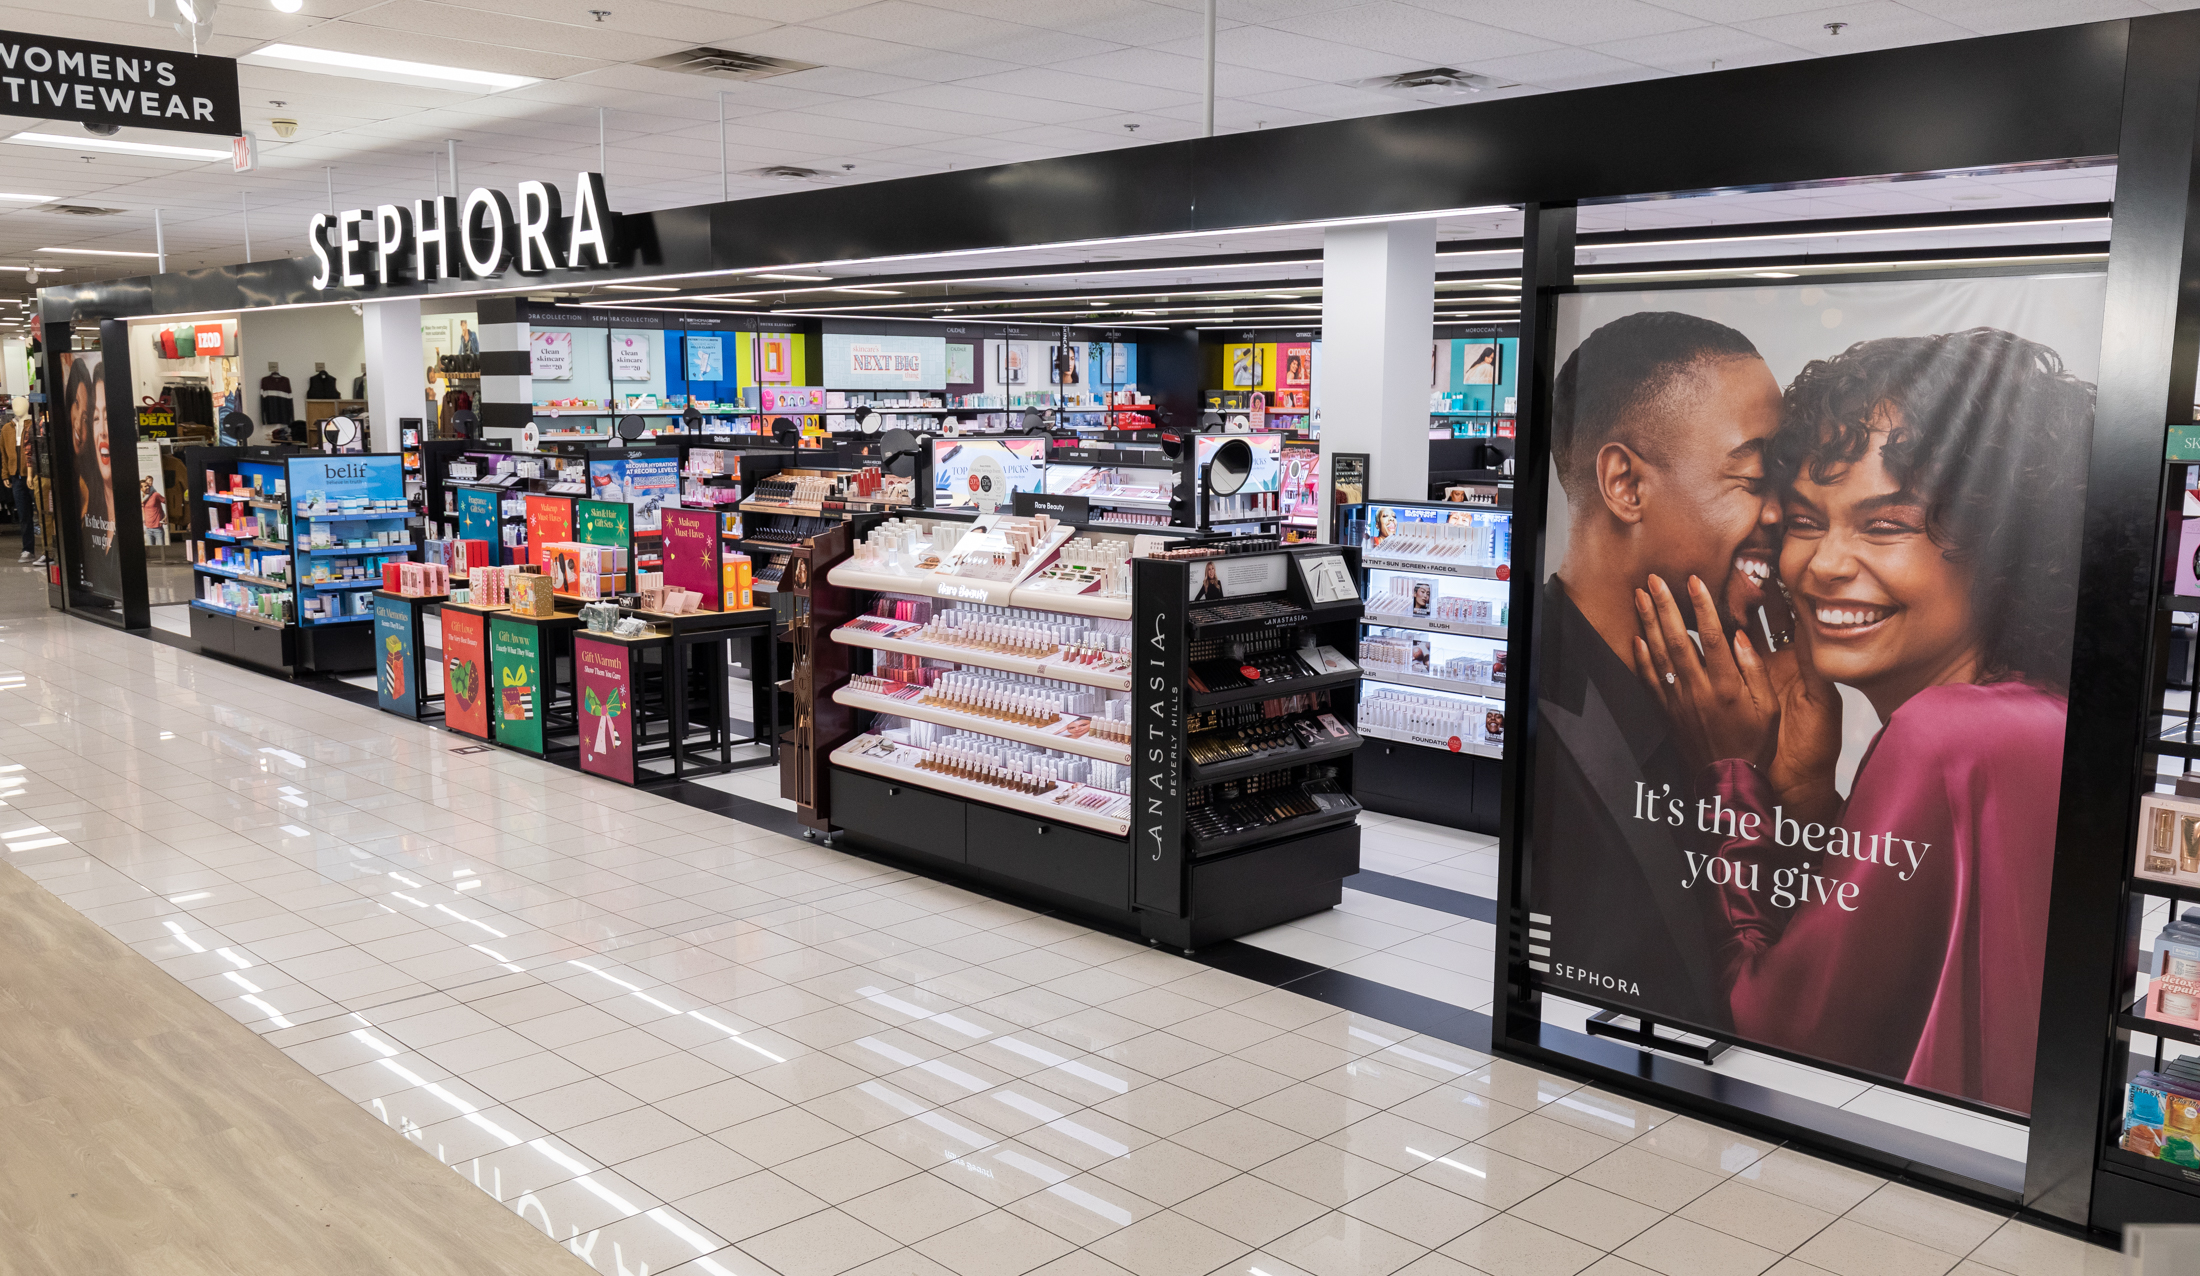 A Nars Makeup Display in a Sephora Cosmetics Retail Store in a